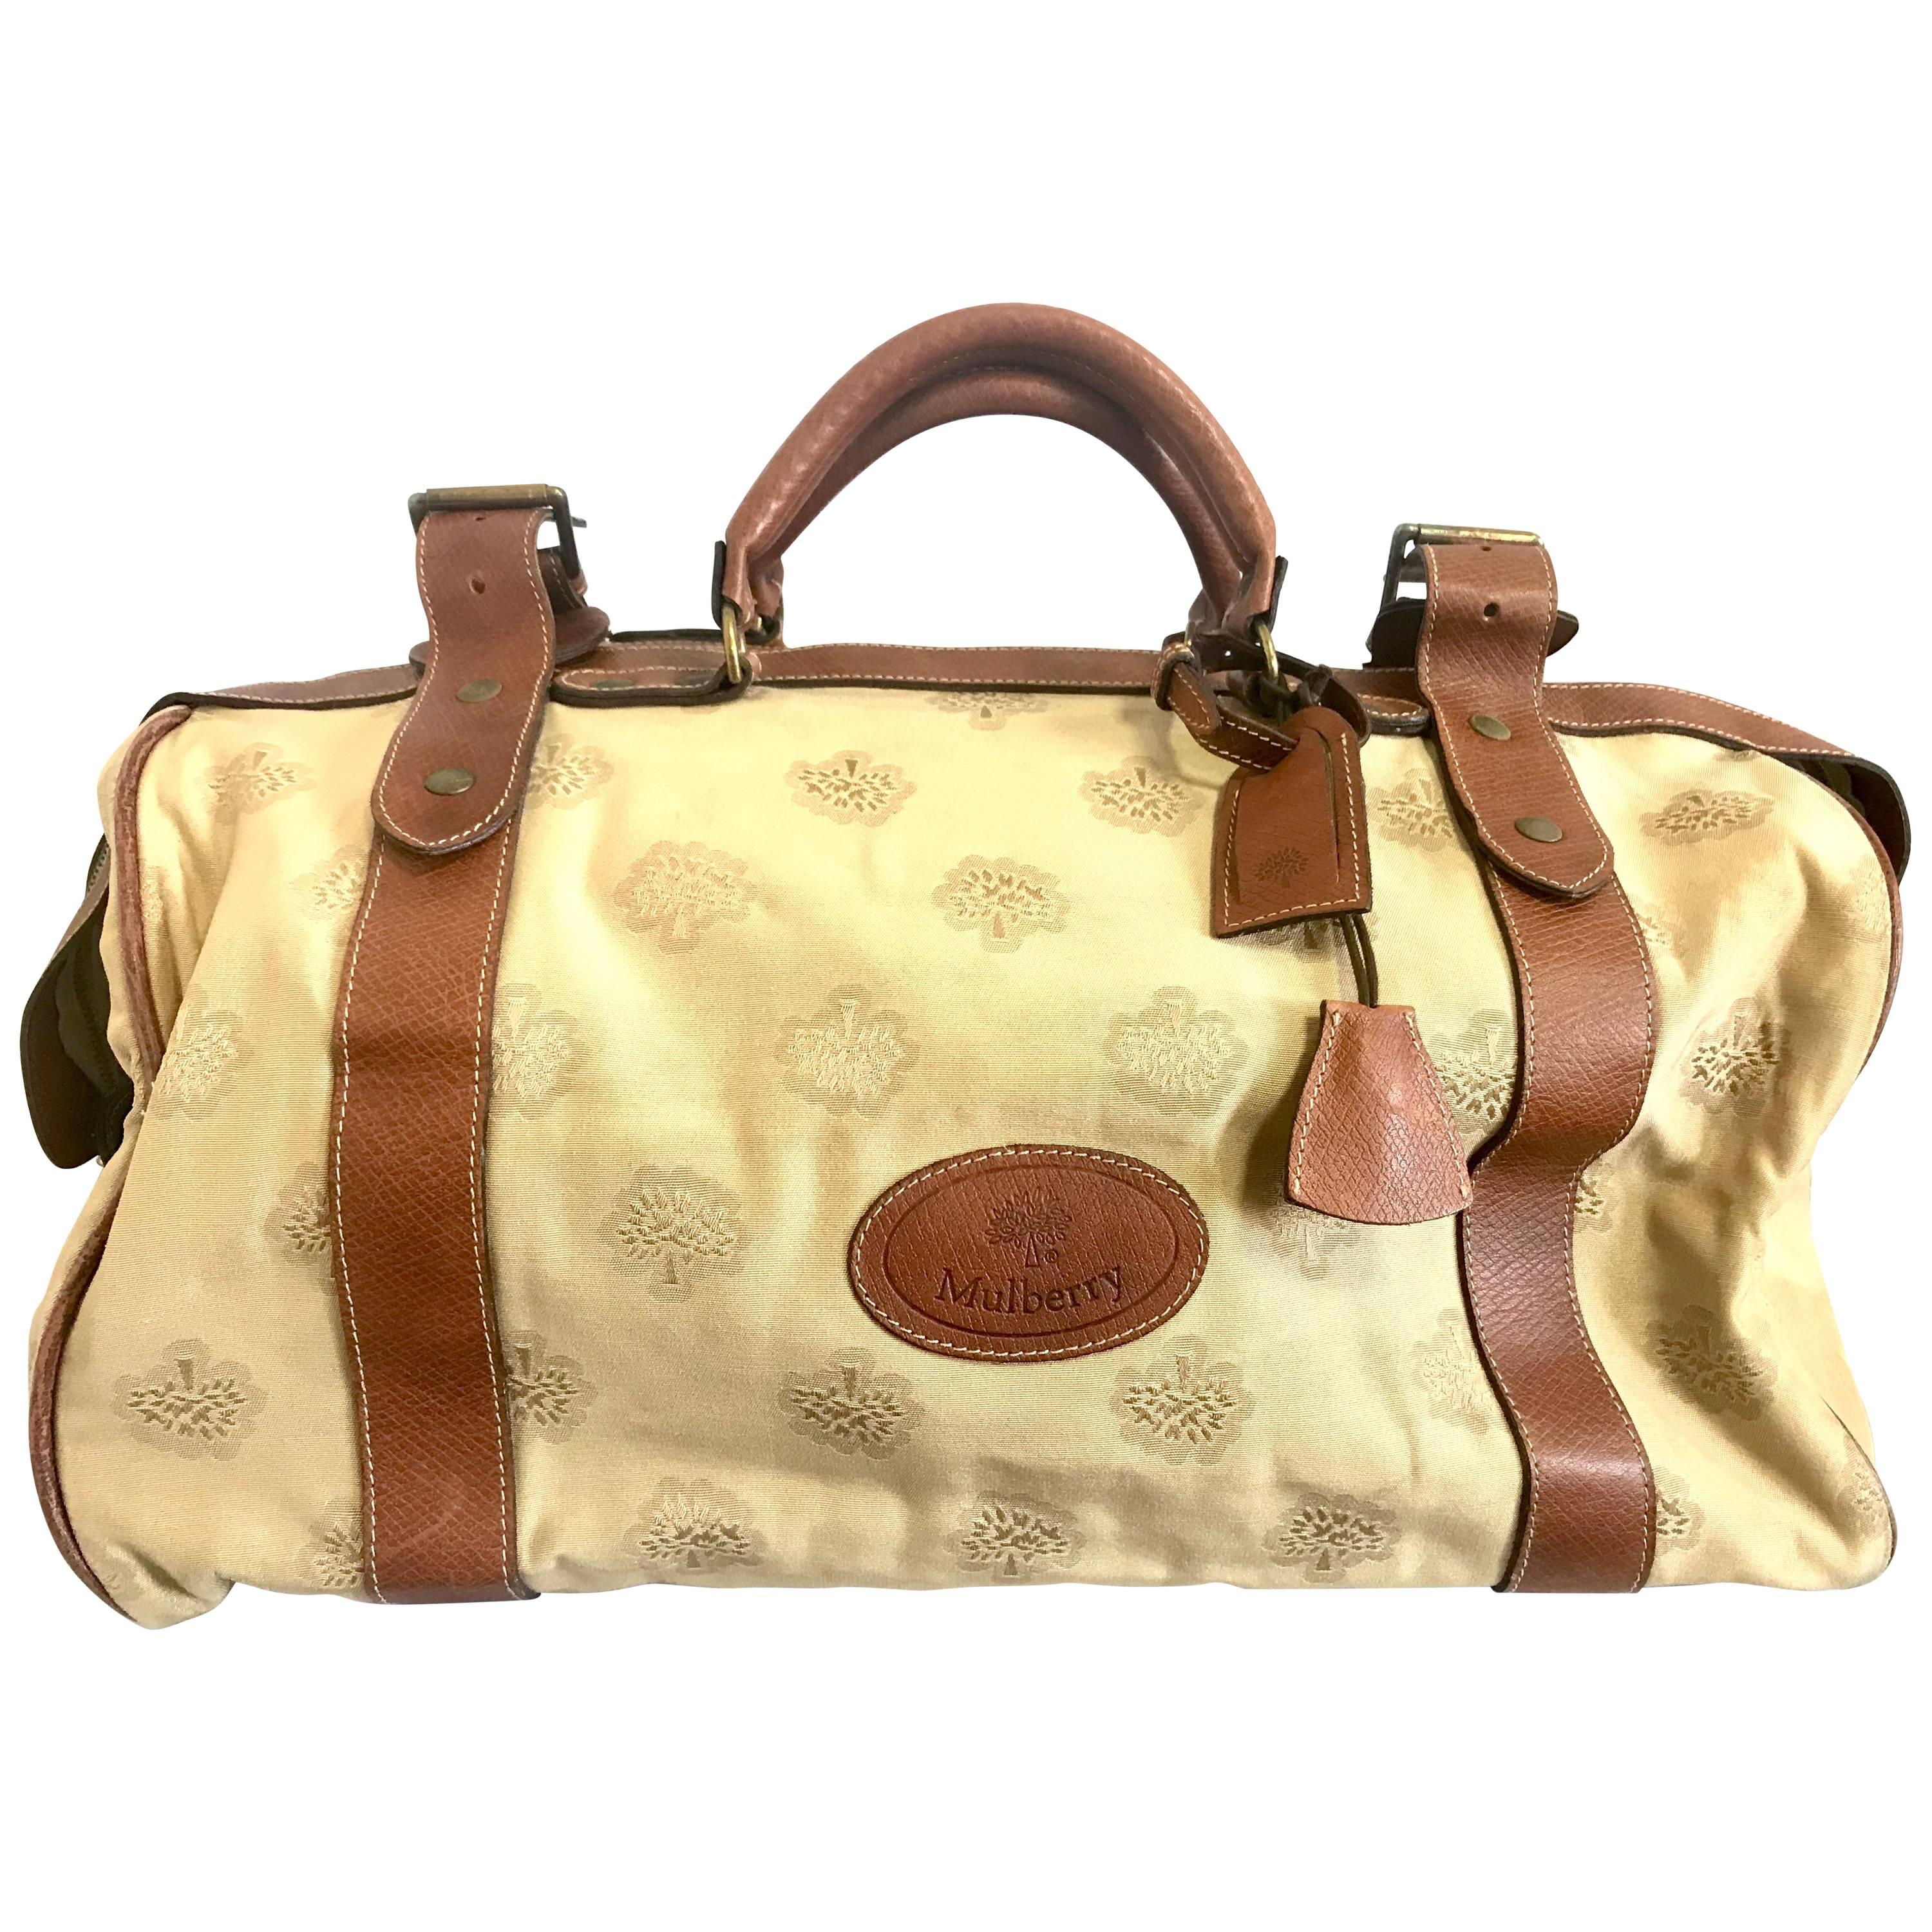 Vintage Mulberry beige logo jacquard fabric travel bag, duffle bag with leather.